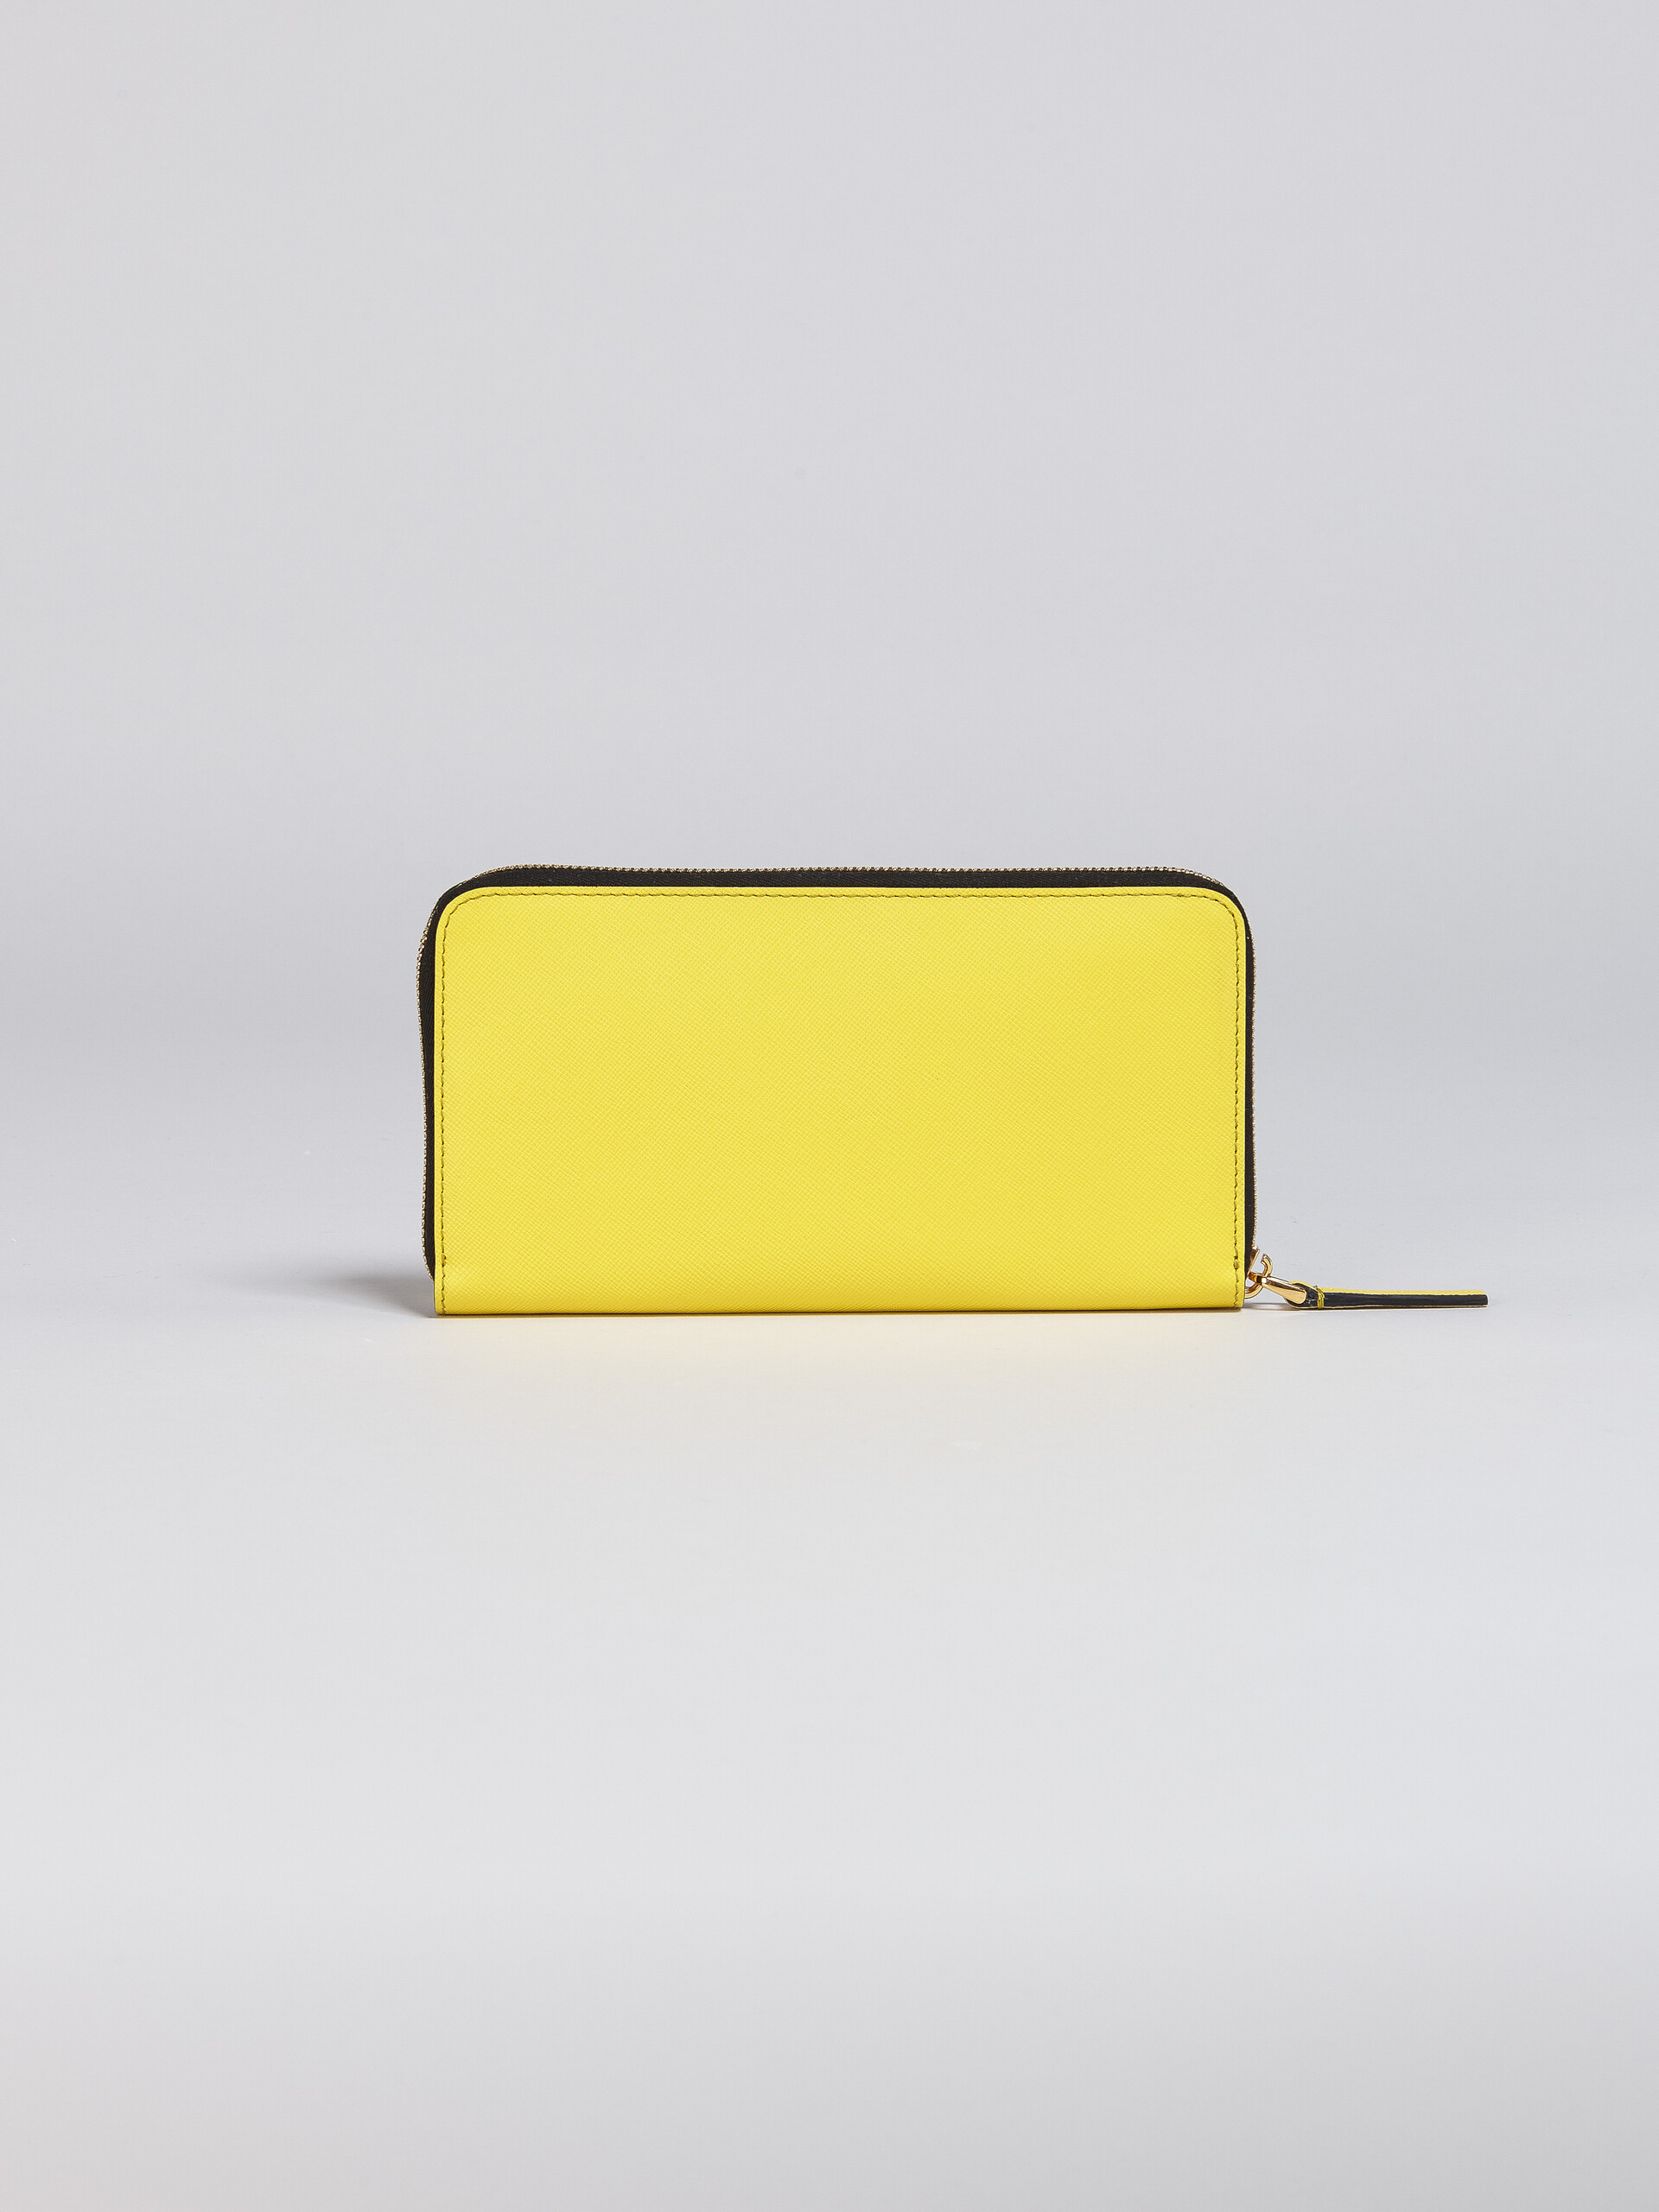 Multicoloured yellow saffiano leather zip-around wallet - Wallets - Image 3